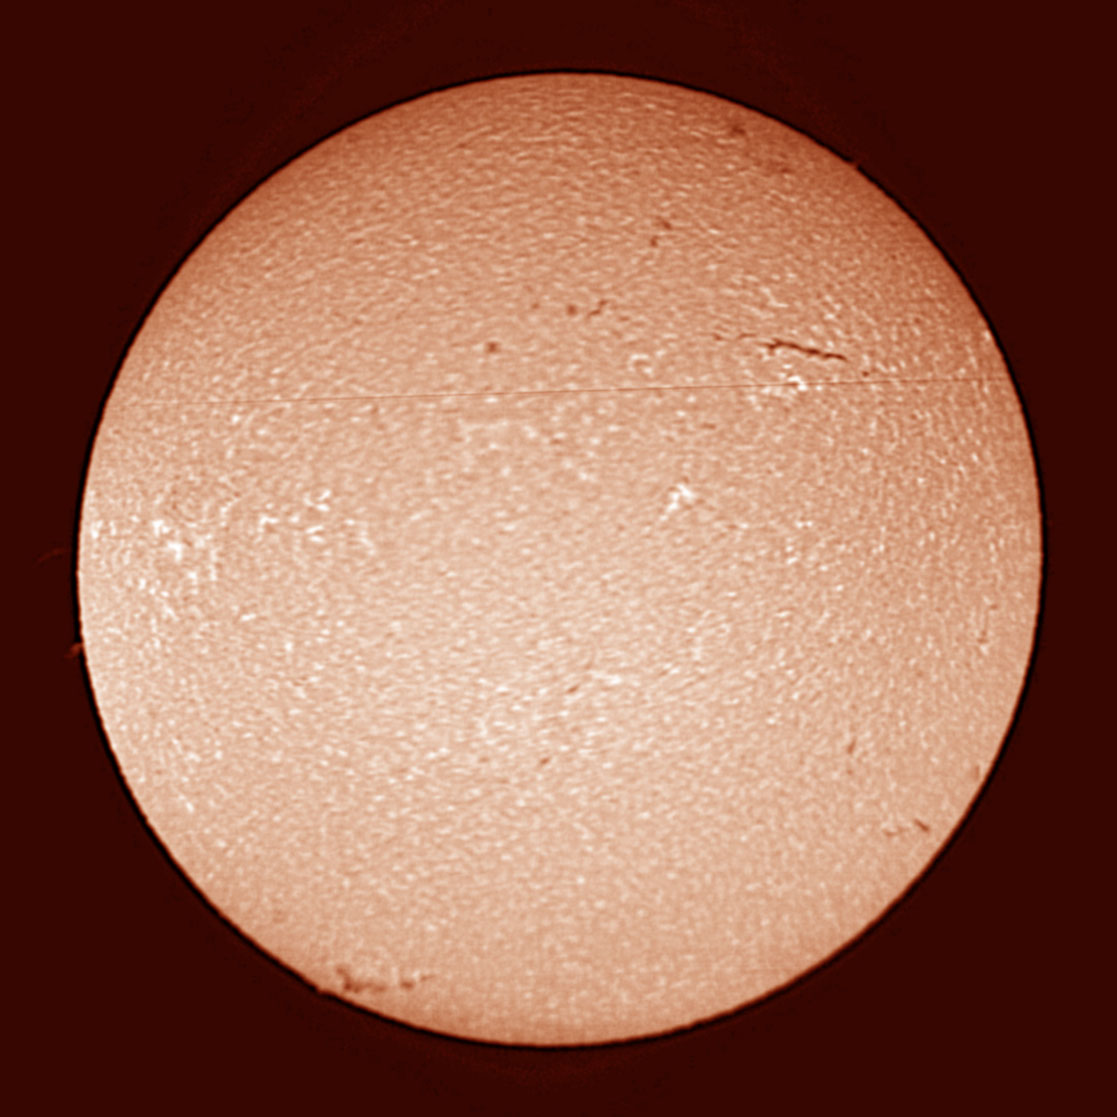 Today's solar surface